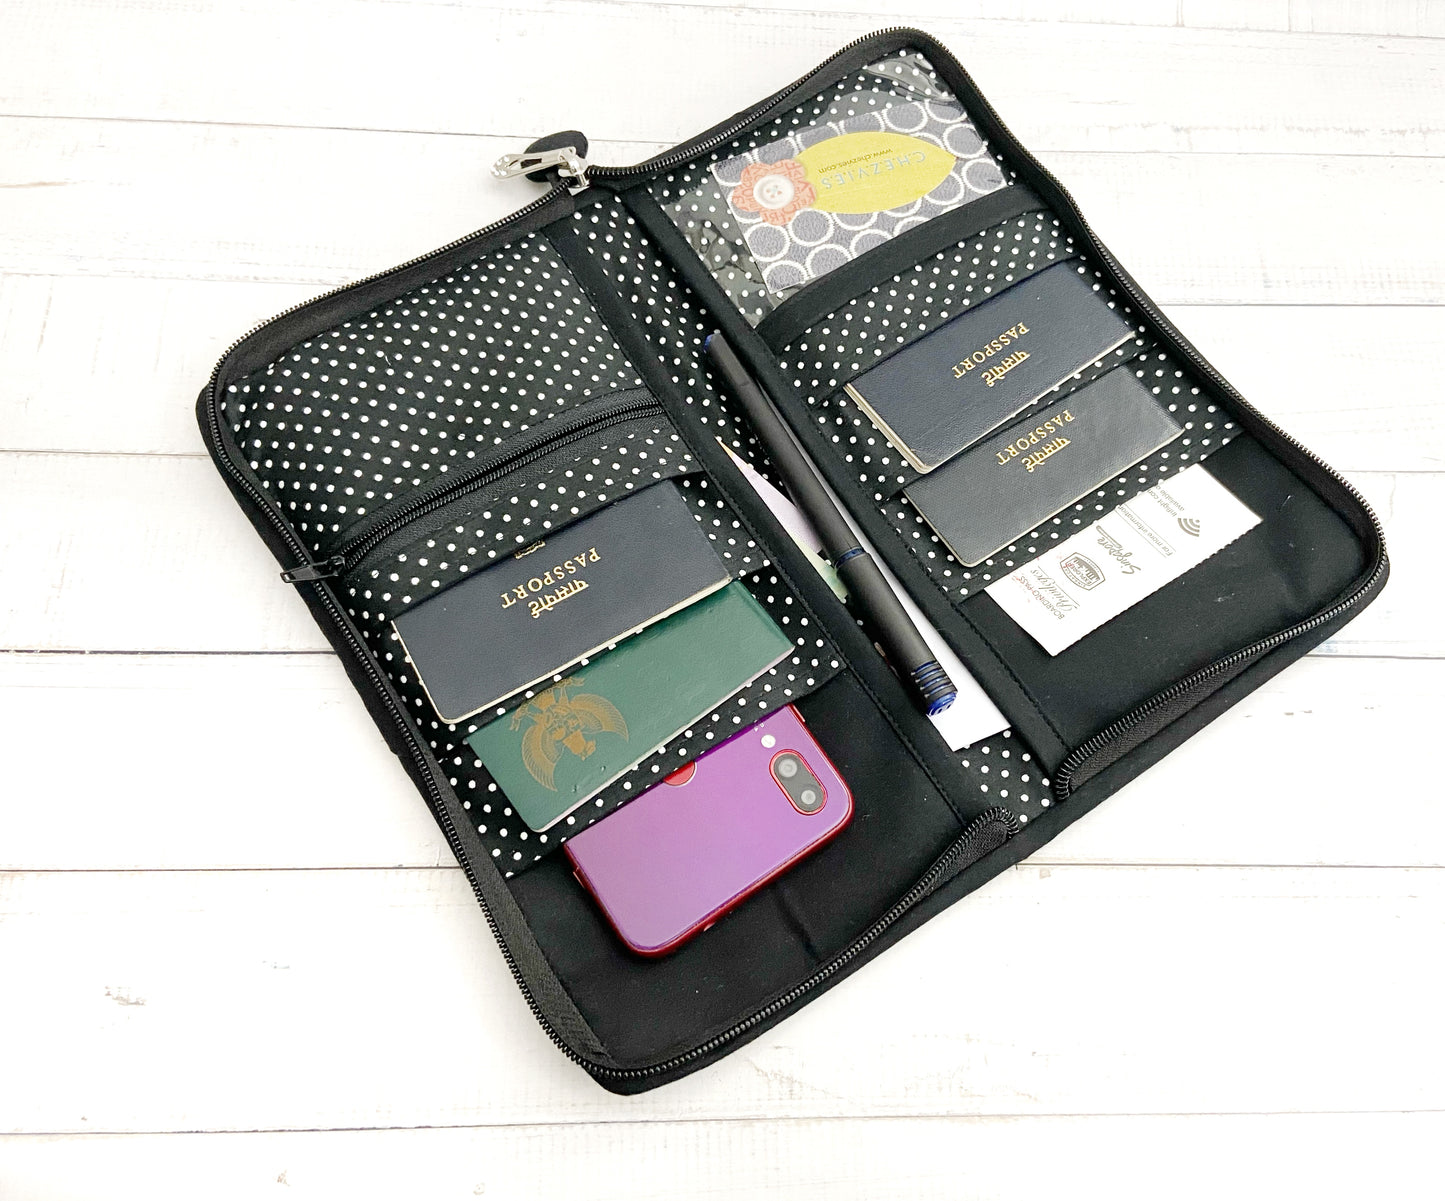 Ohana Family Passport Wallet Sewing Pattern (with Video)